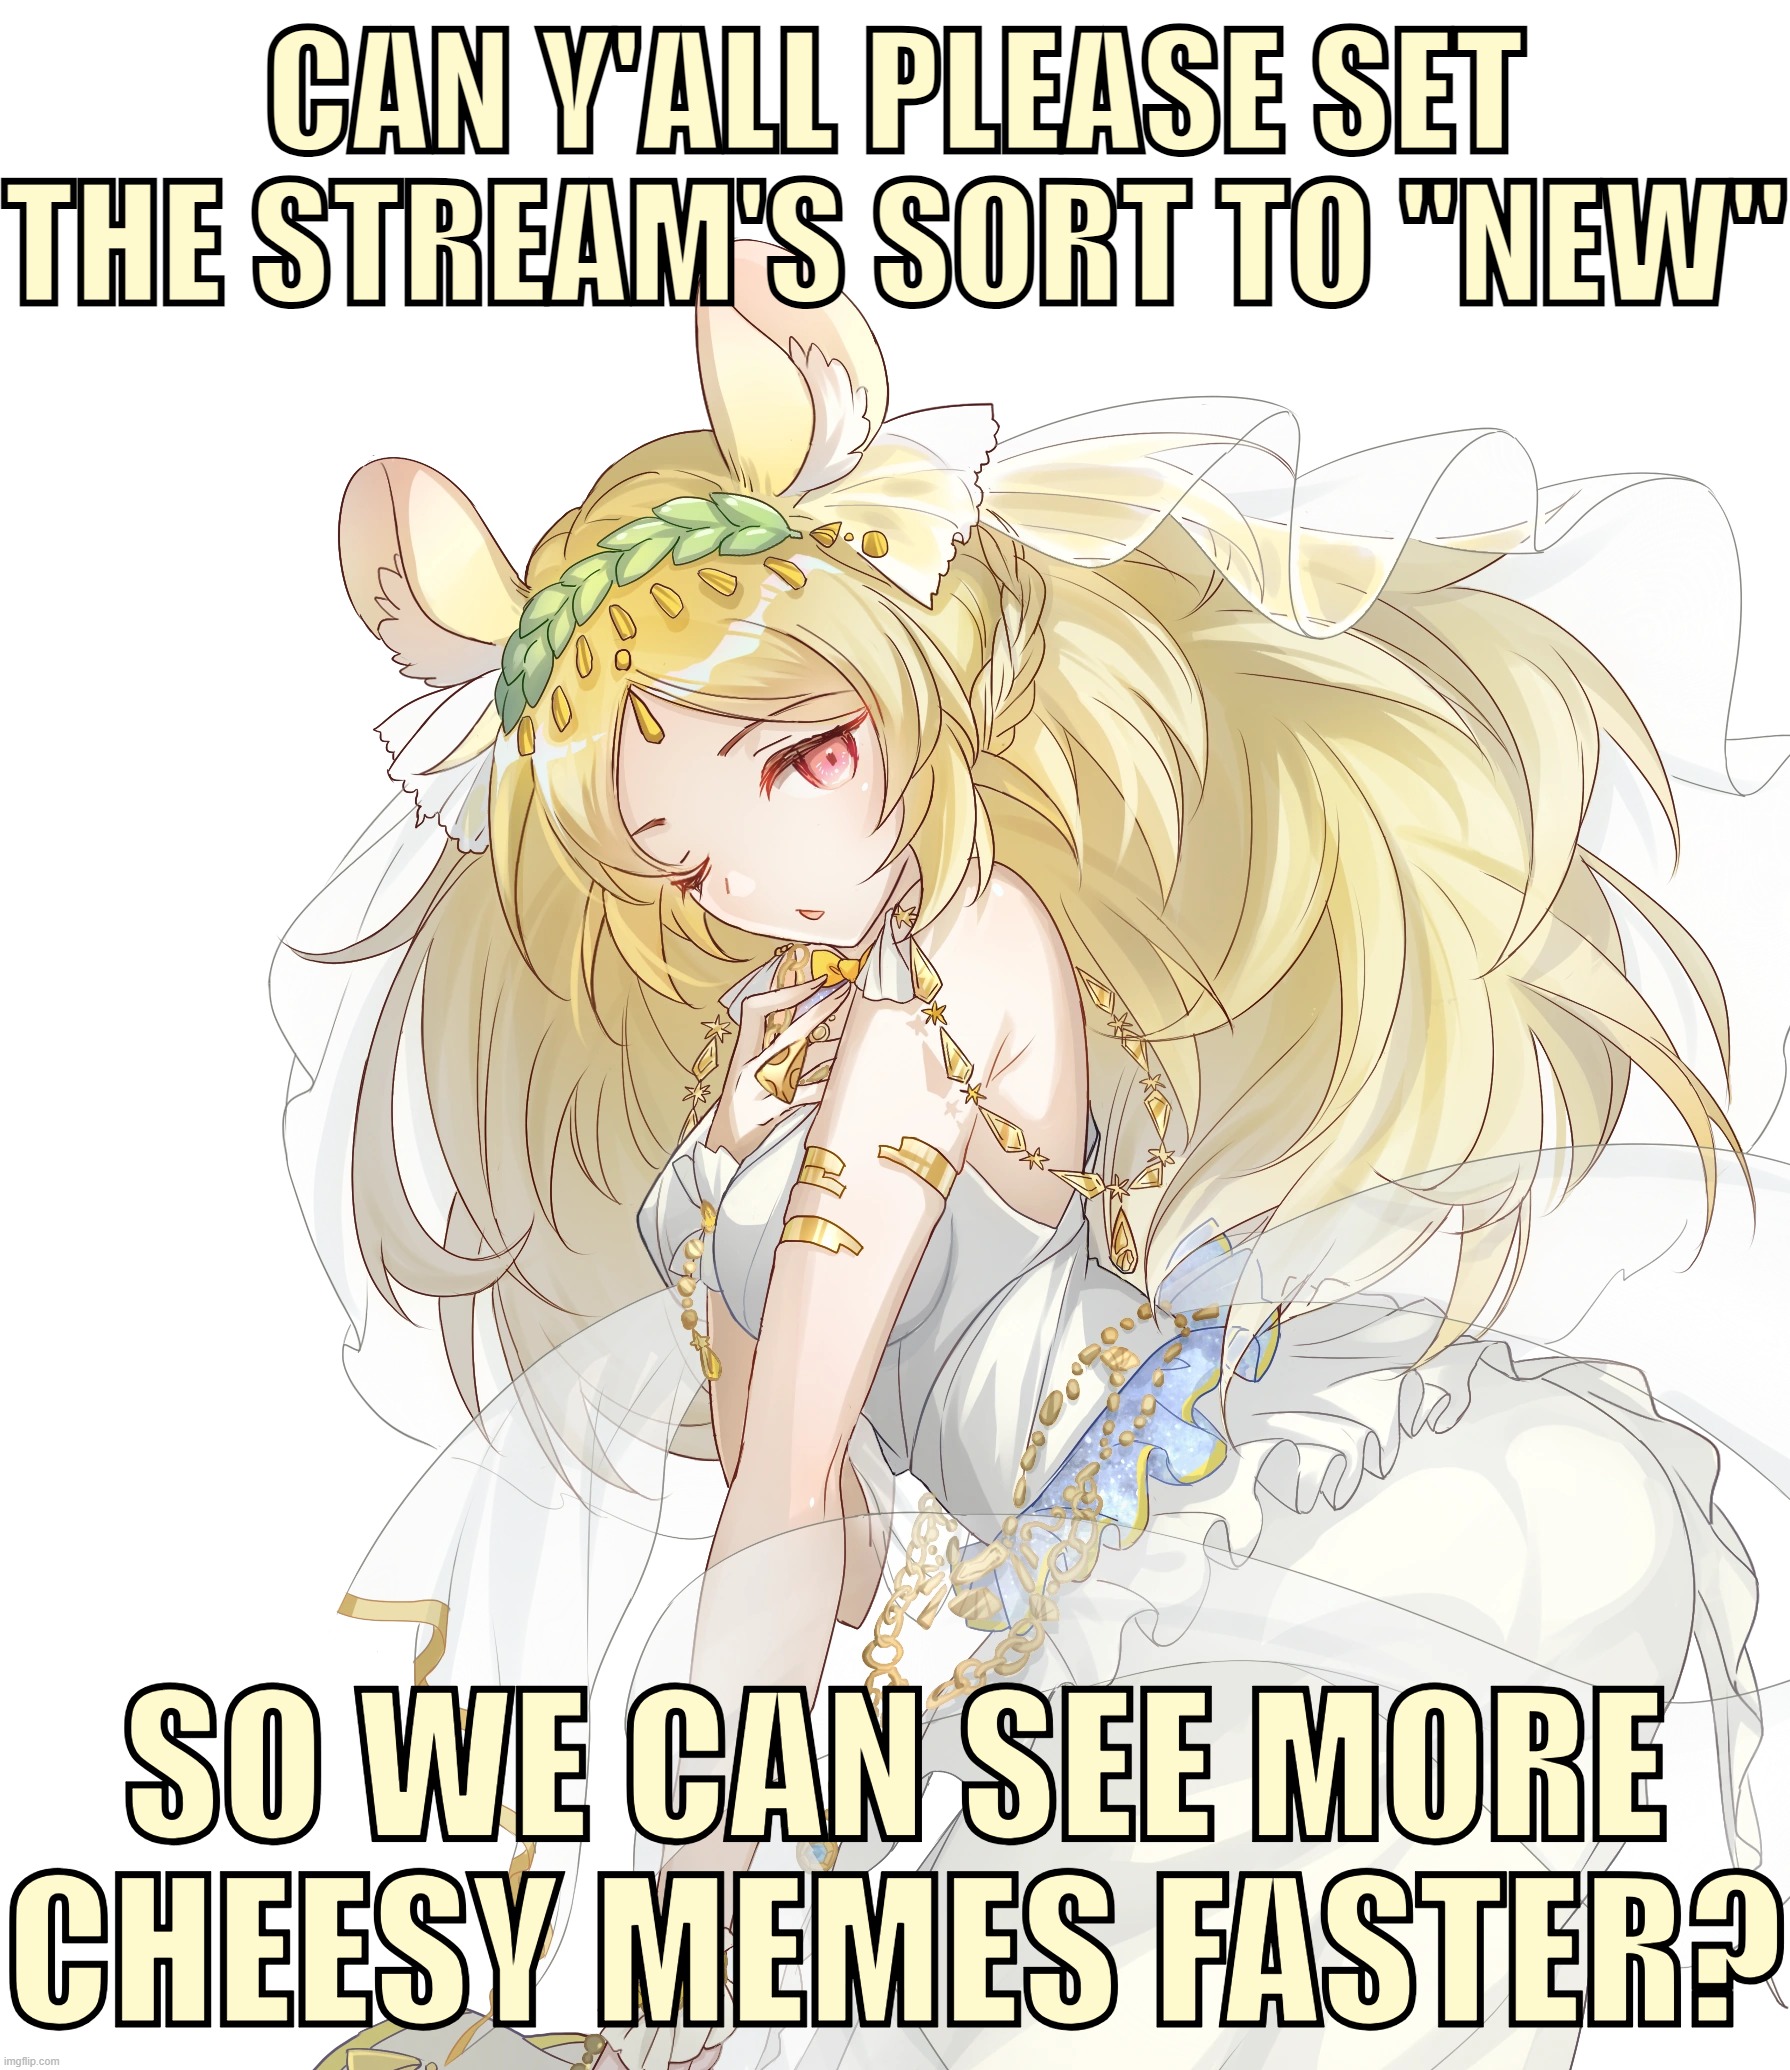 And yes, That is Cheese from Food Fantasy again. xD | CAN Y'ALL PLEASE SET THE STREAM'S SORT TO "NEW"; SO WE CAN SEE MORE CHEESY MEMES FASTER? | image tagged in food fantasy,cheese | made w/ Imgflip meme maker